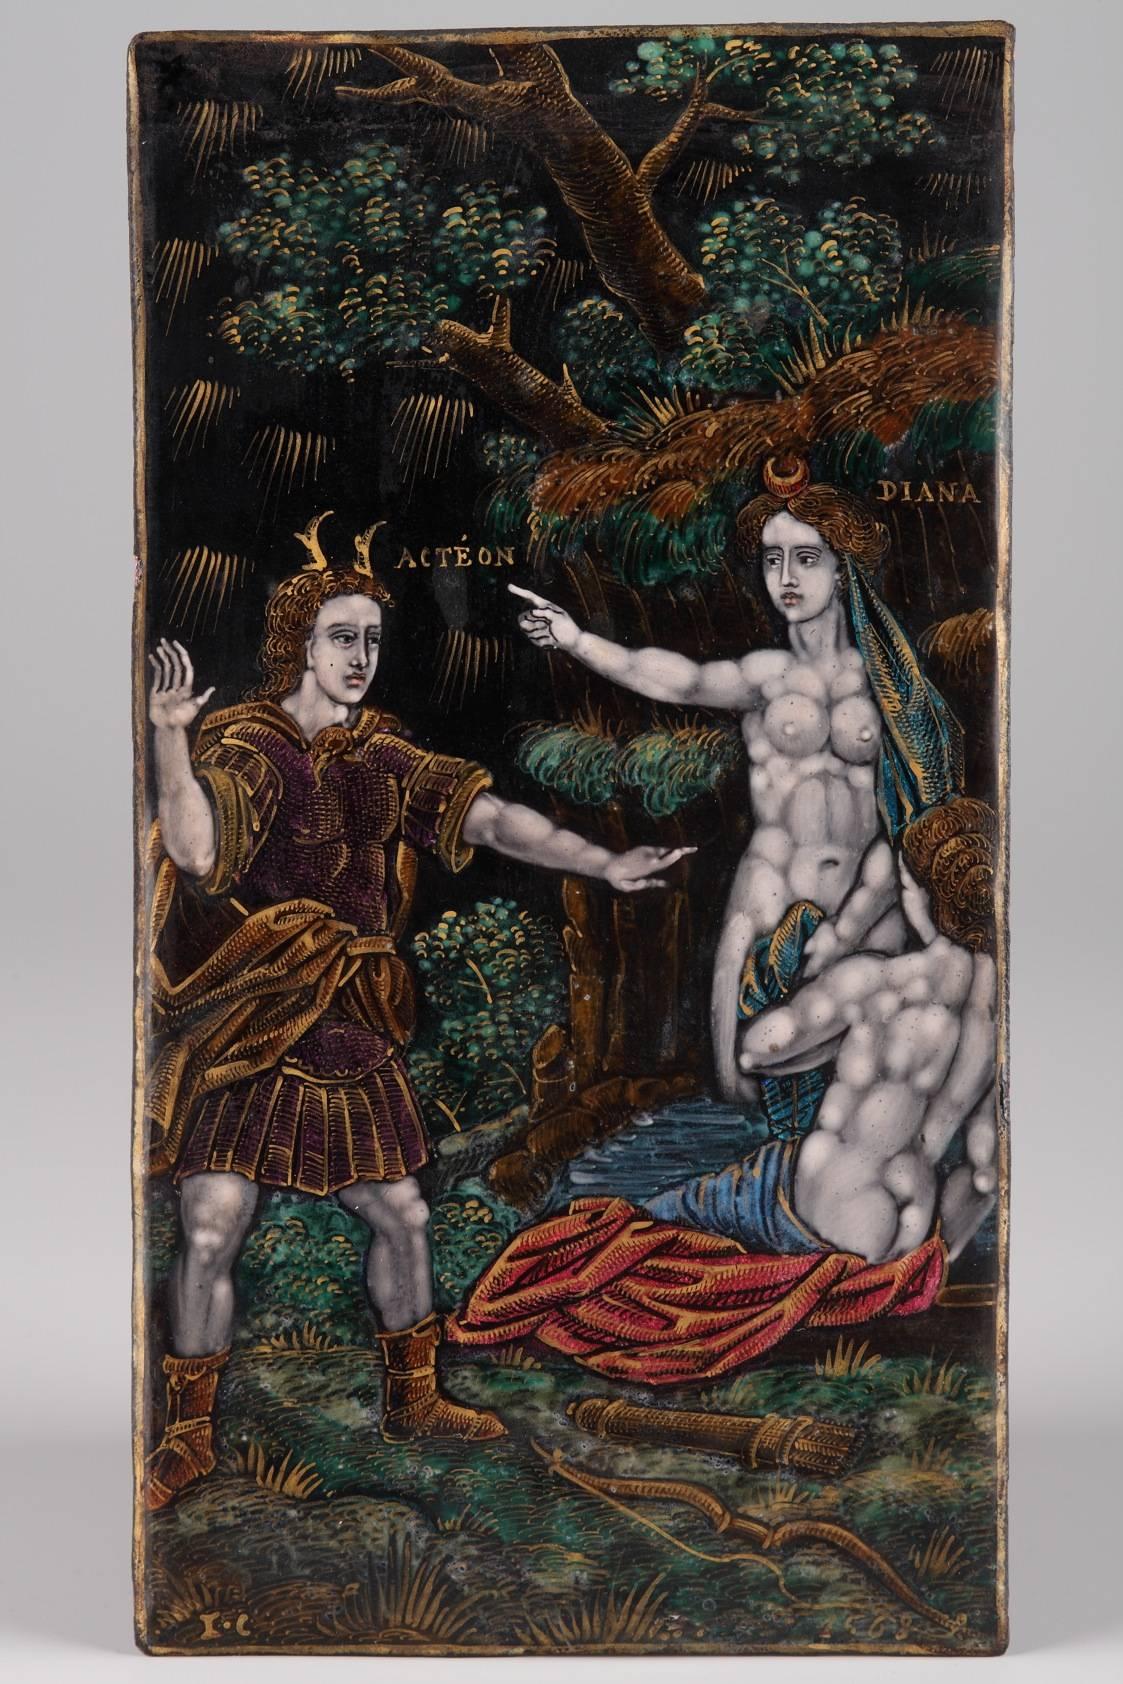 Two pairs of plates with multicolored, enameled decorations of mythological scenes. They depict the myths of Venus and Adonis as well as Diana and Acteon. Adonis, a handsome young man, is shown here as a hunter in the company of Venus. The goddess